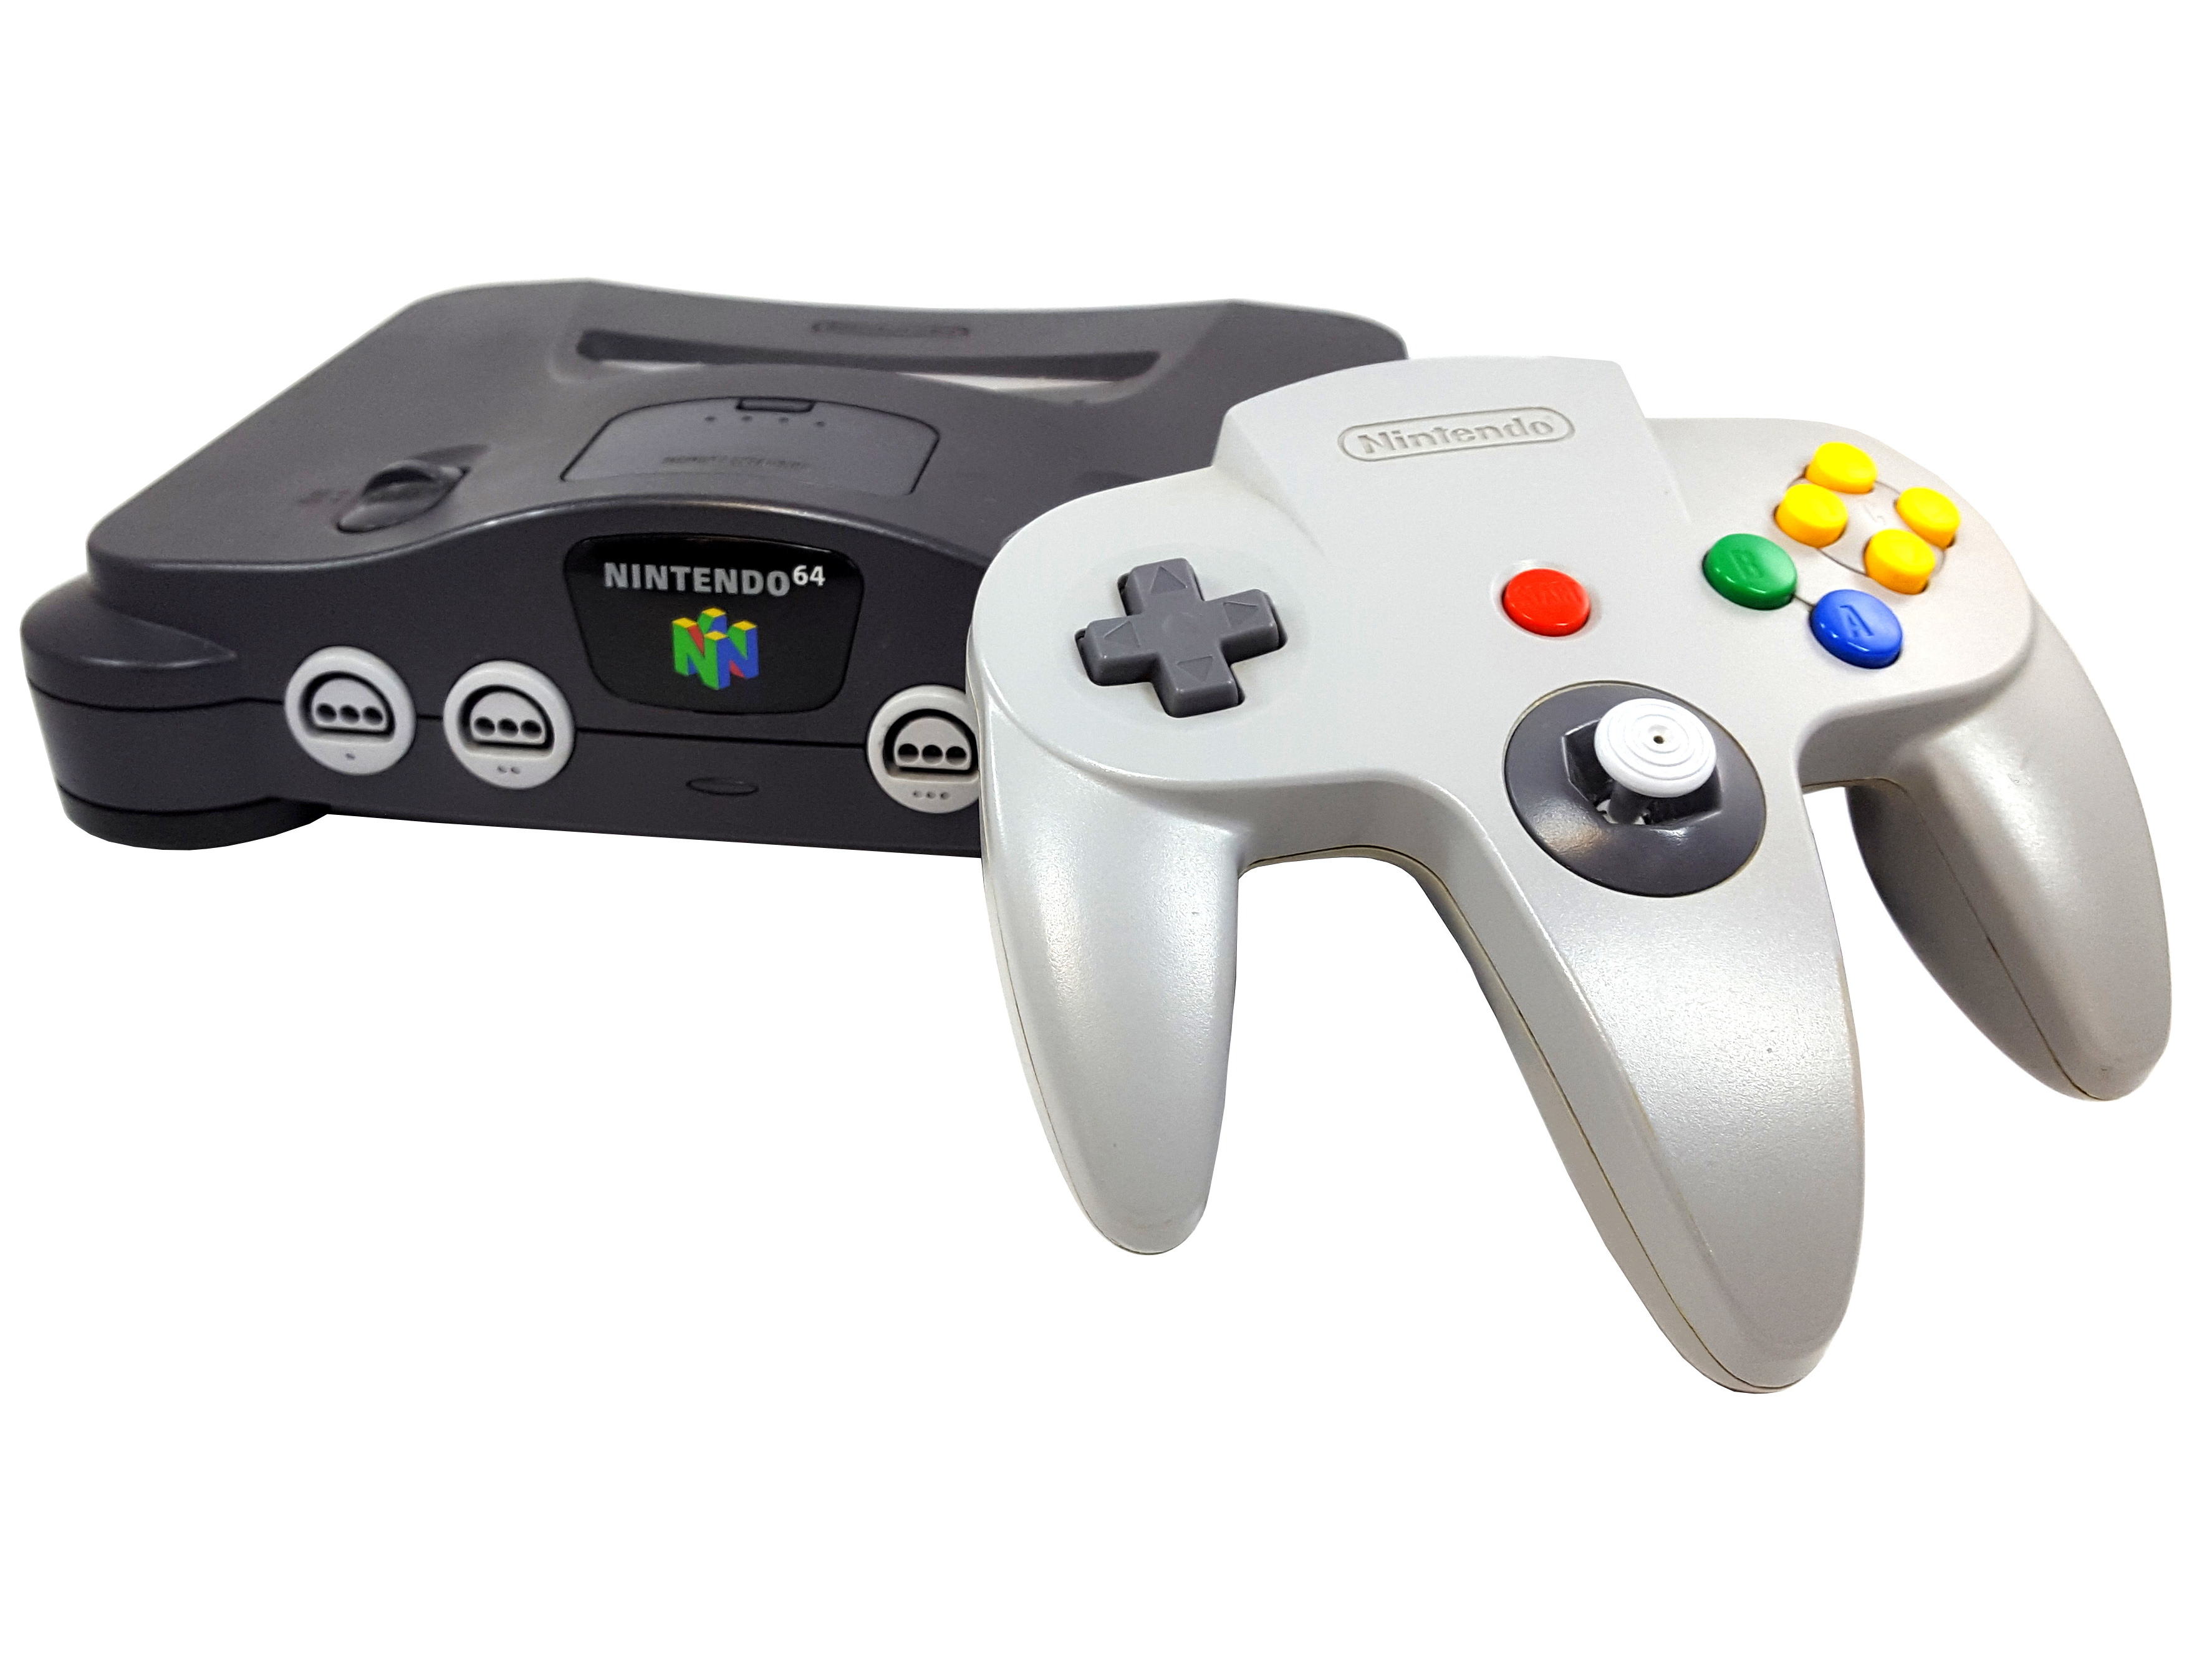 Nintendo 64 N64 Video Game Console with Matching Controller and Cables - image 1 of 4